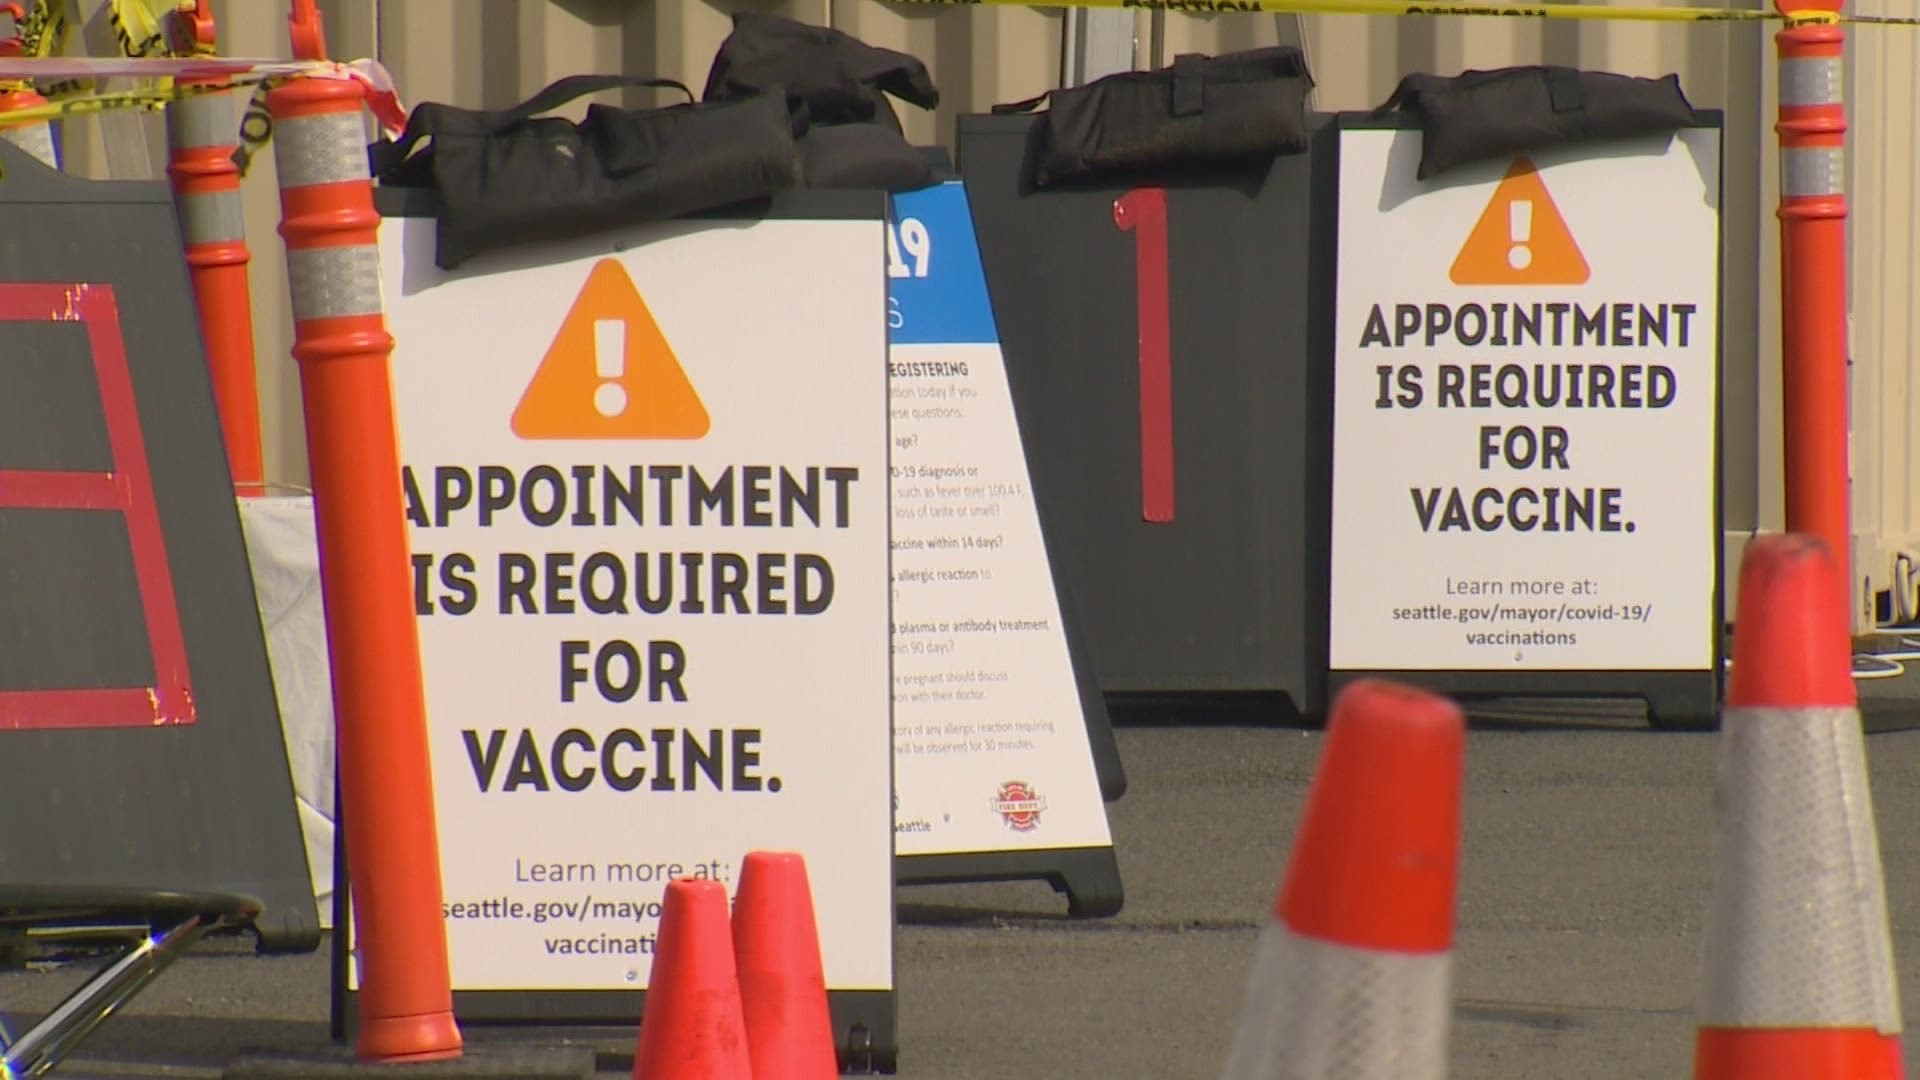 For weeks, people eligible for the vaccine have been frustrated by the scarcity of available shots. Now there are hundreds of open spots. What happened?